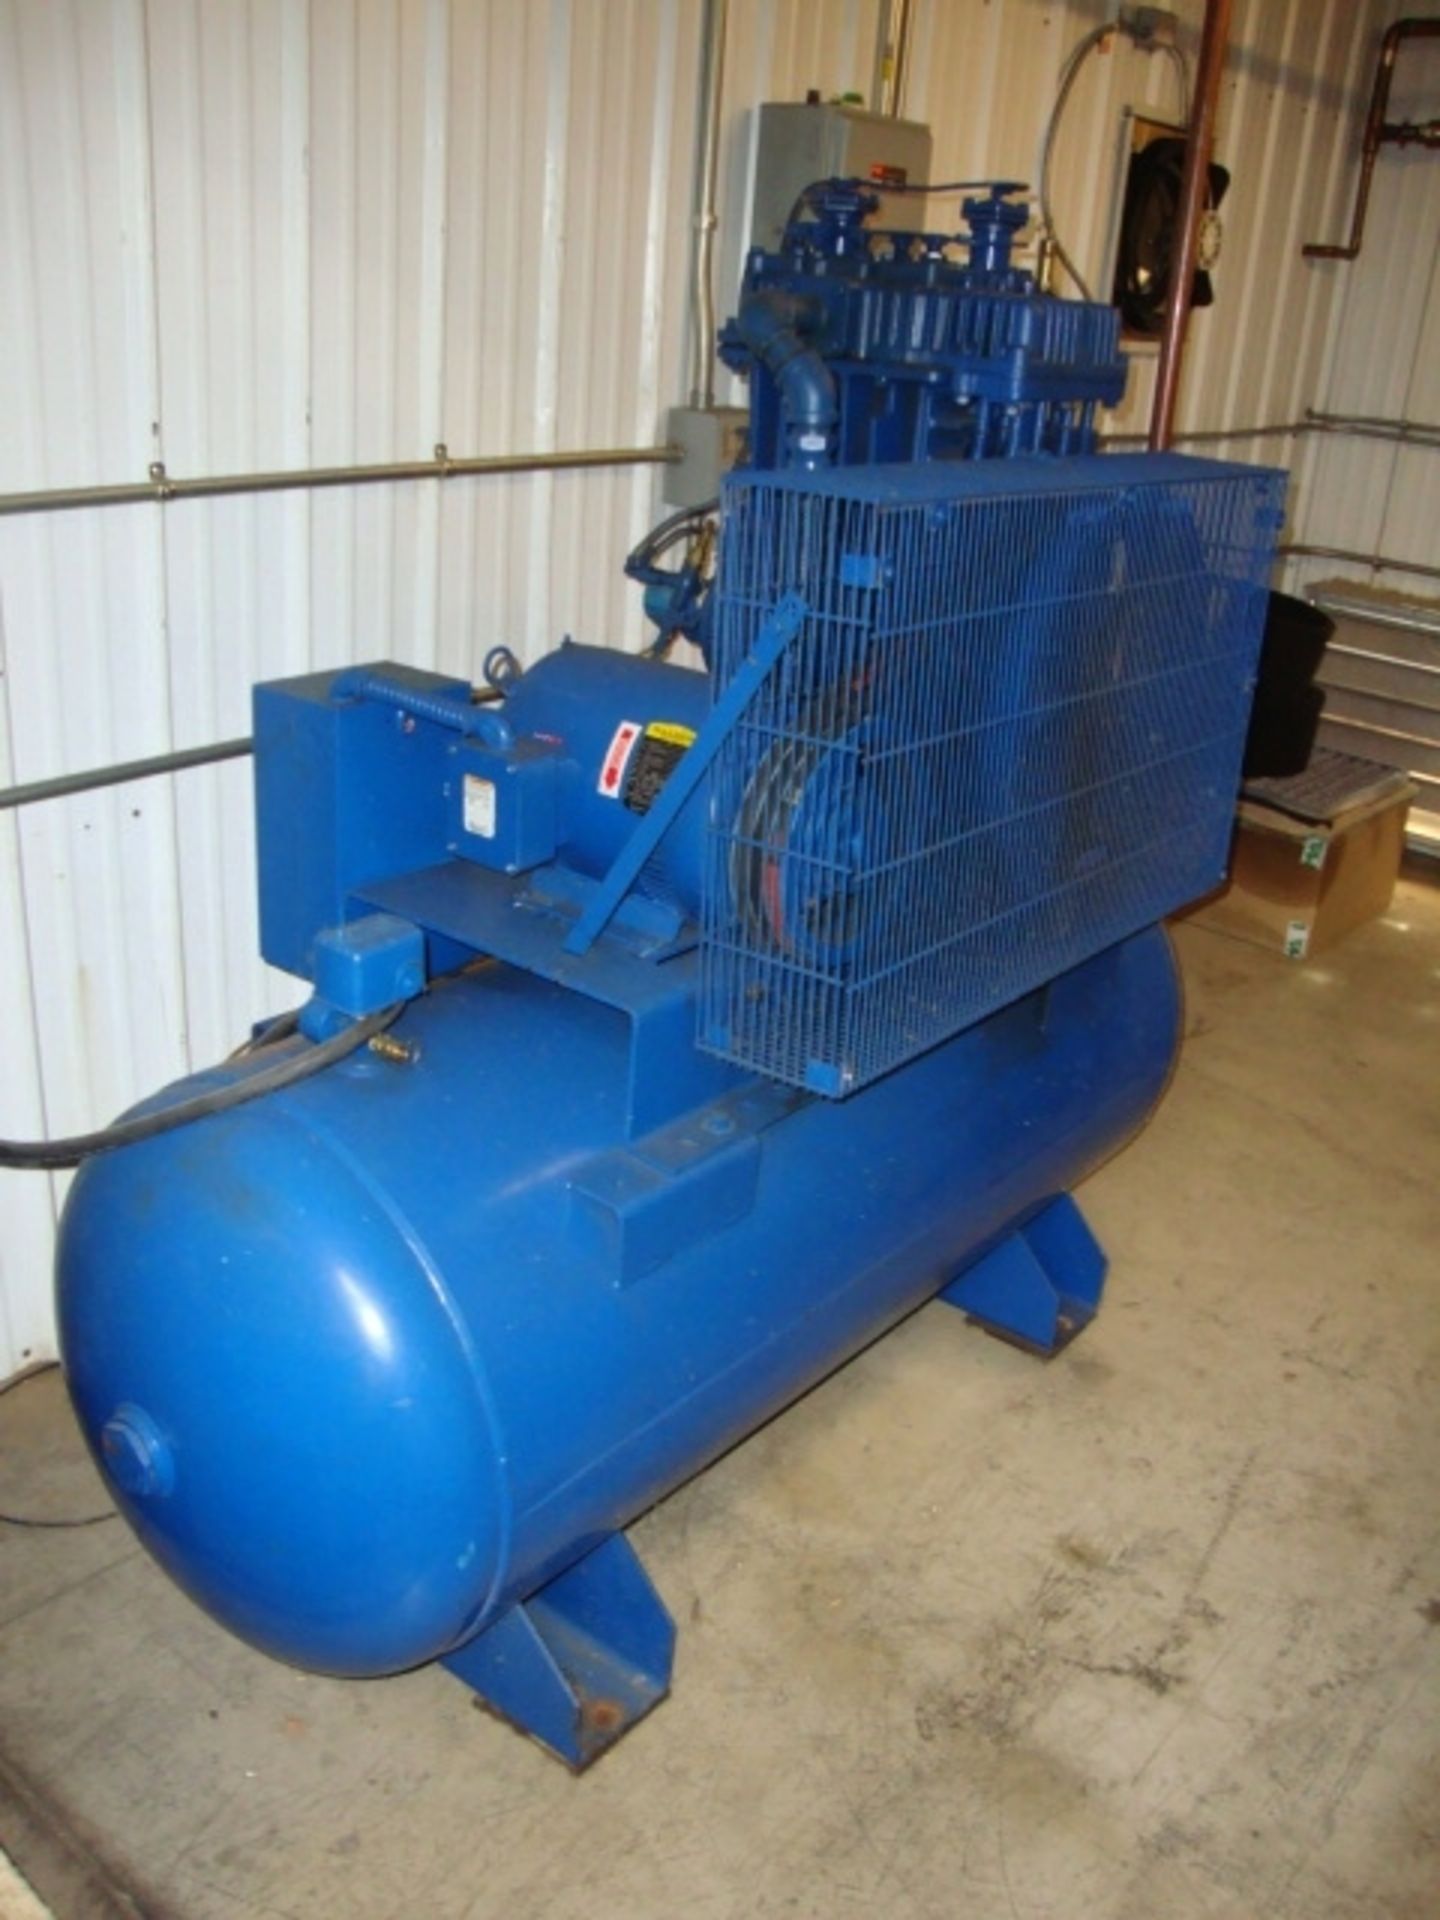 Quincy 10hp Compressor with 60gal Tank & Magnetic Starter, Model# 350QRB, 208-230V, 3ph